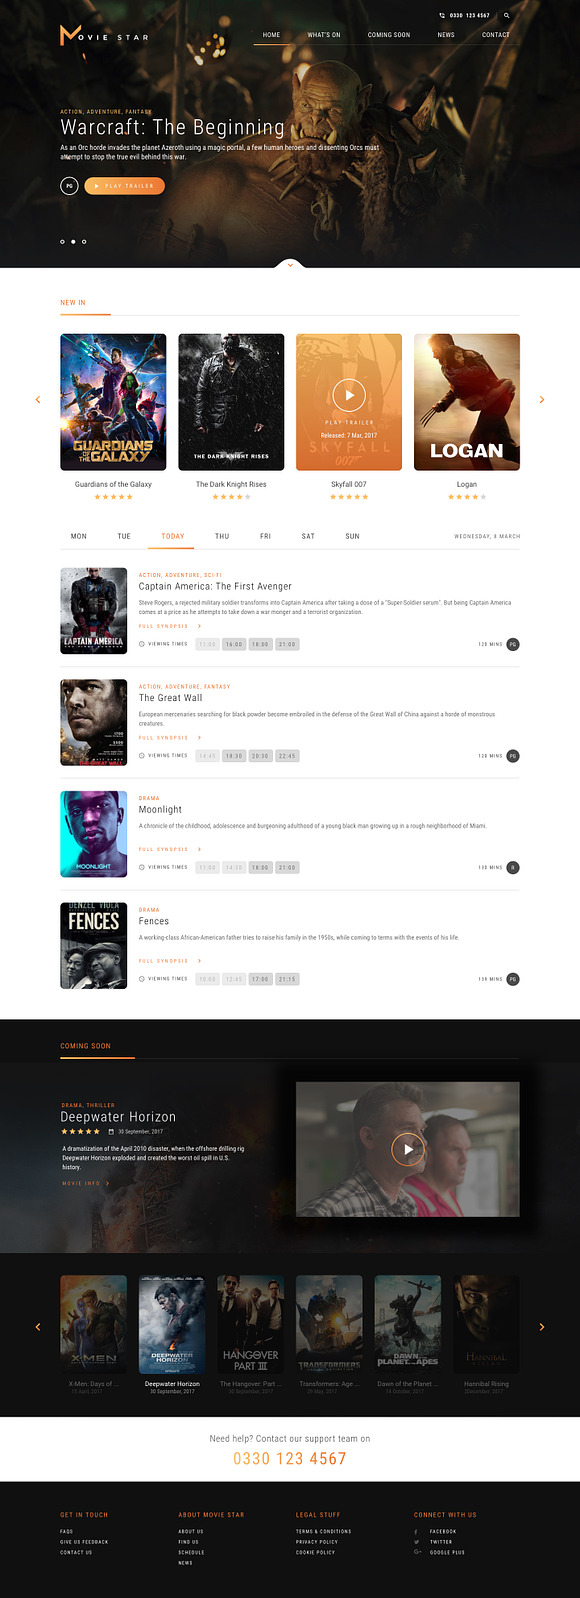 Movie Star - Sketch design in App Templates - product preview 1